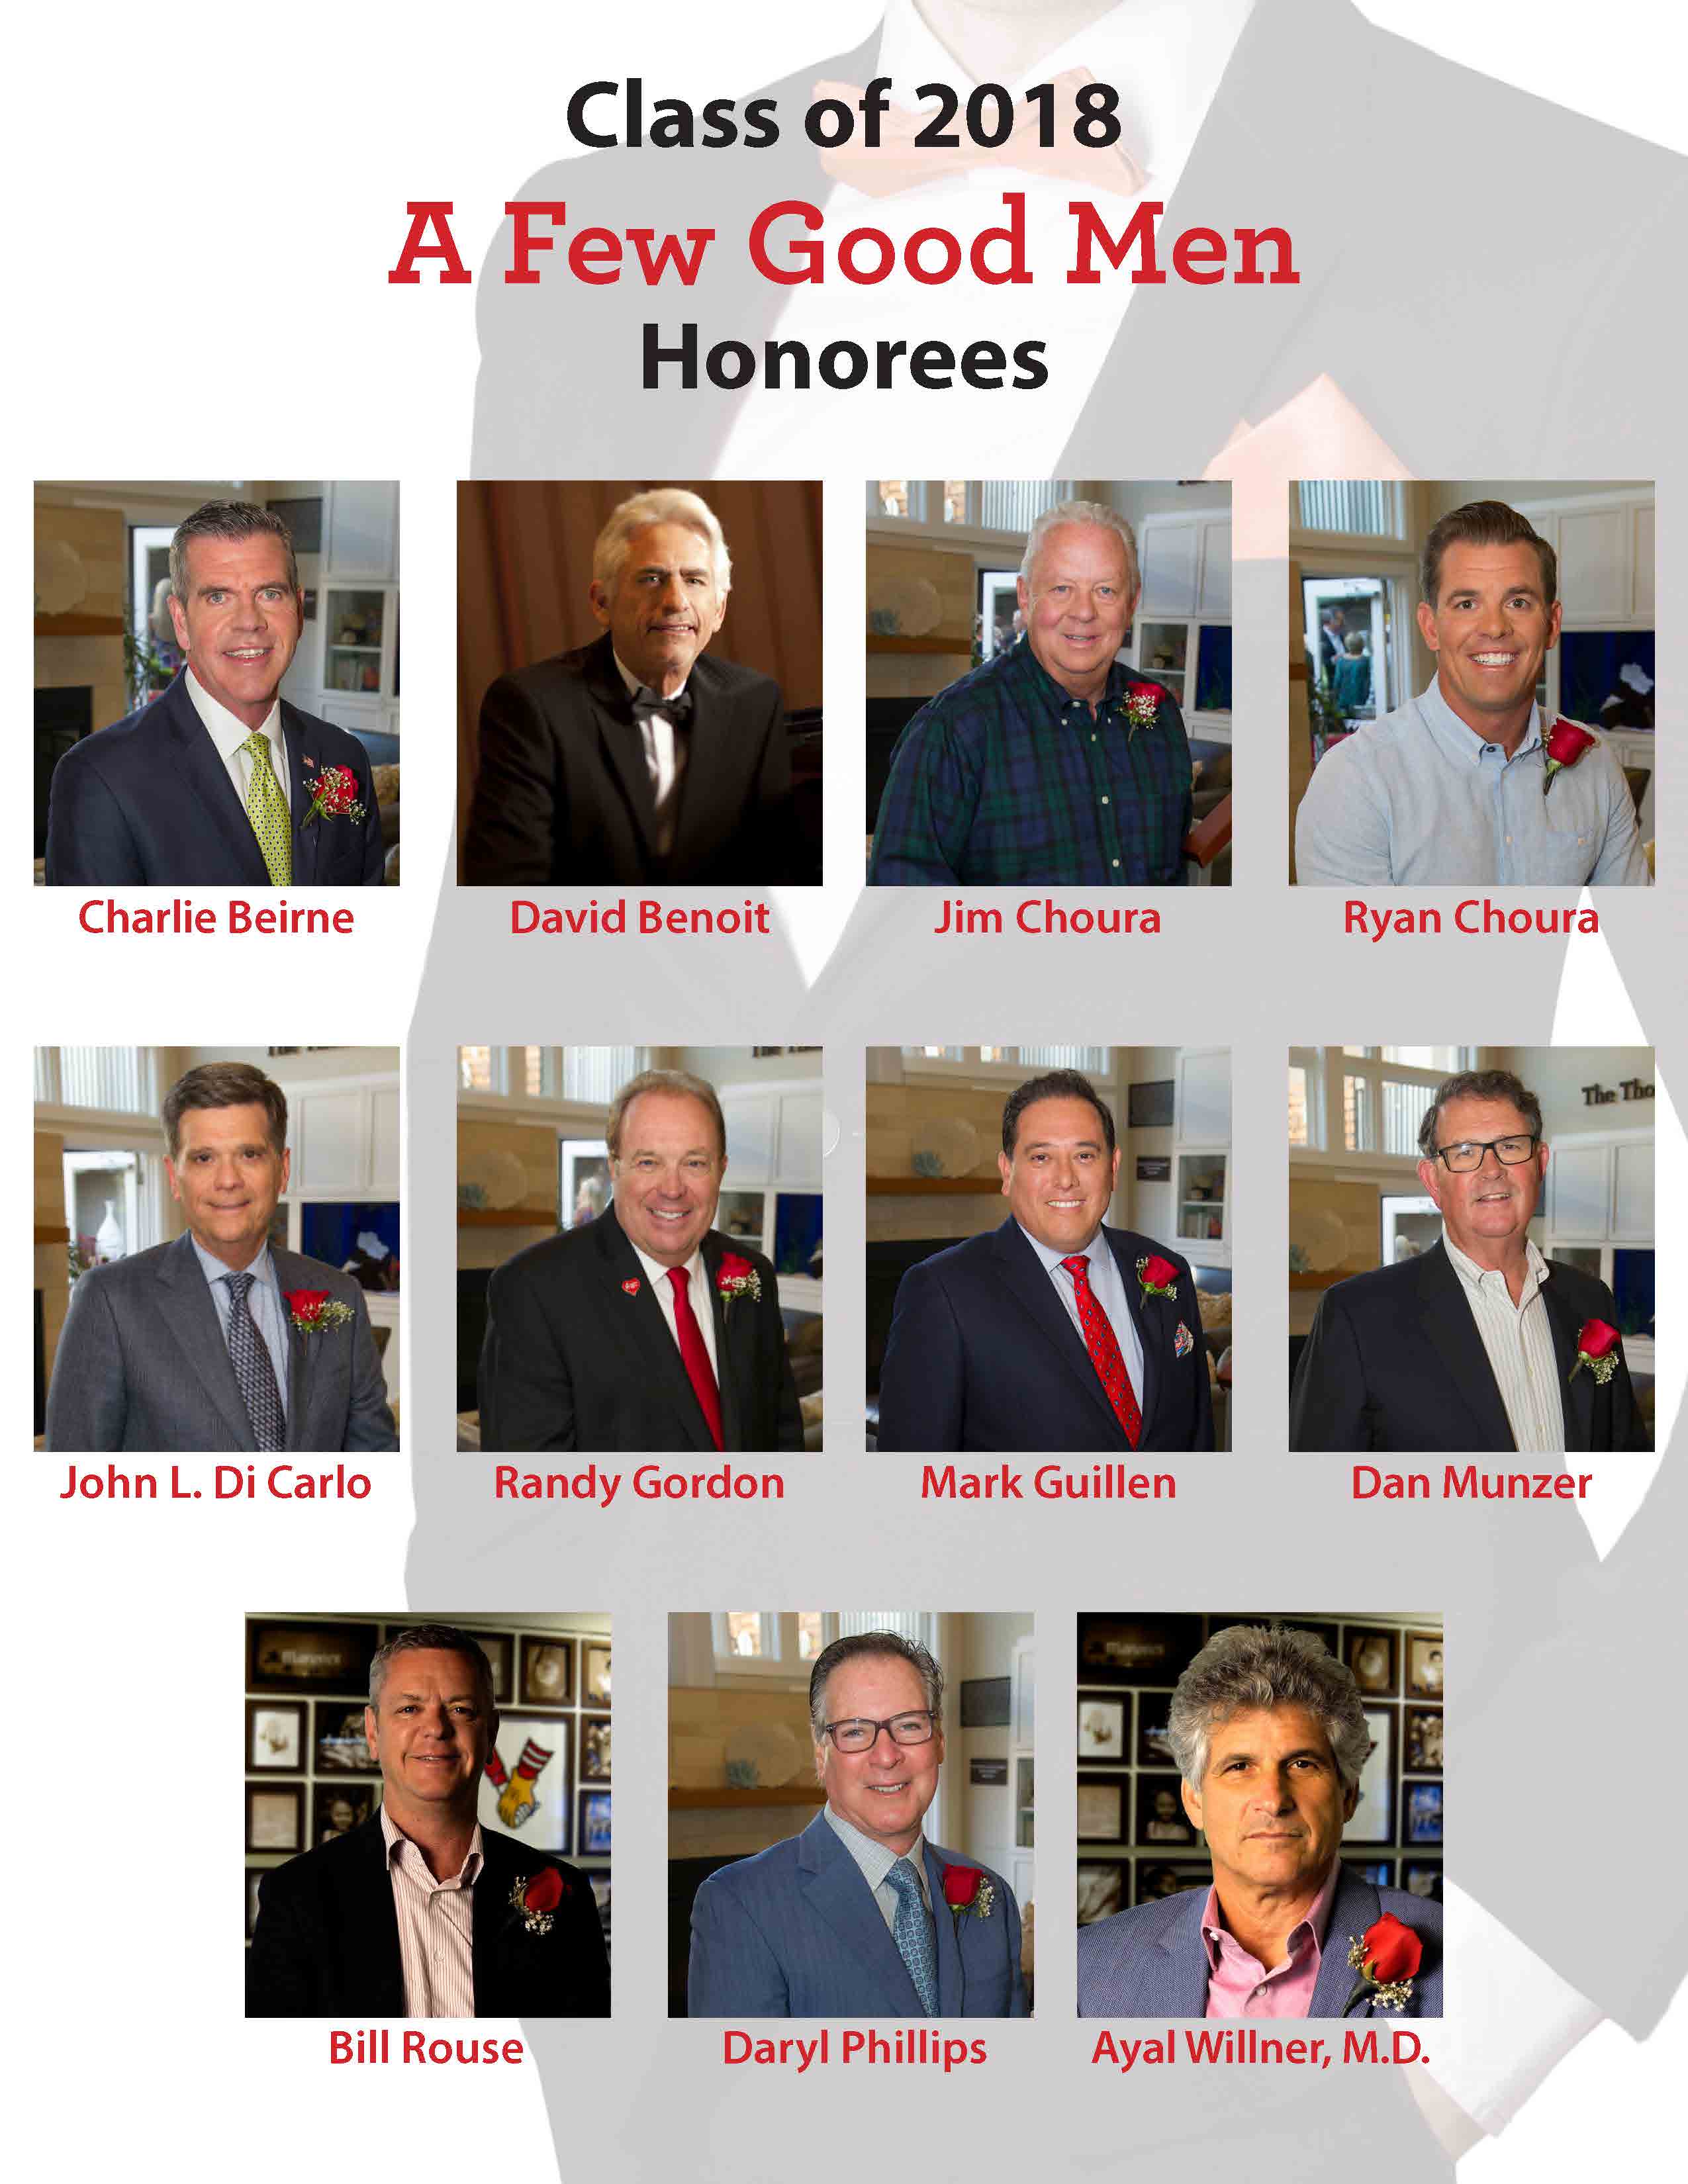 Honorees Photos collage